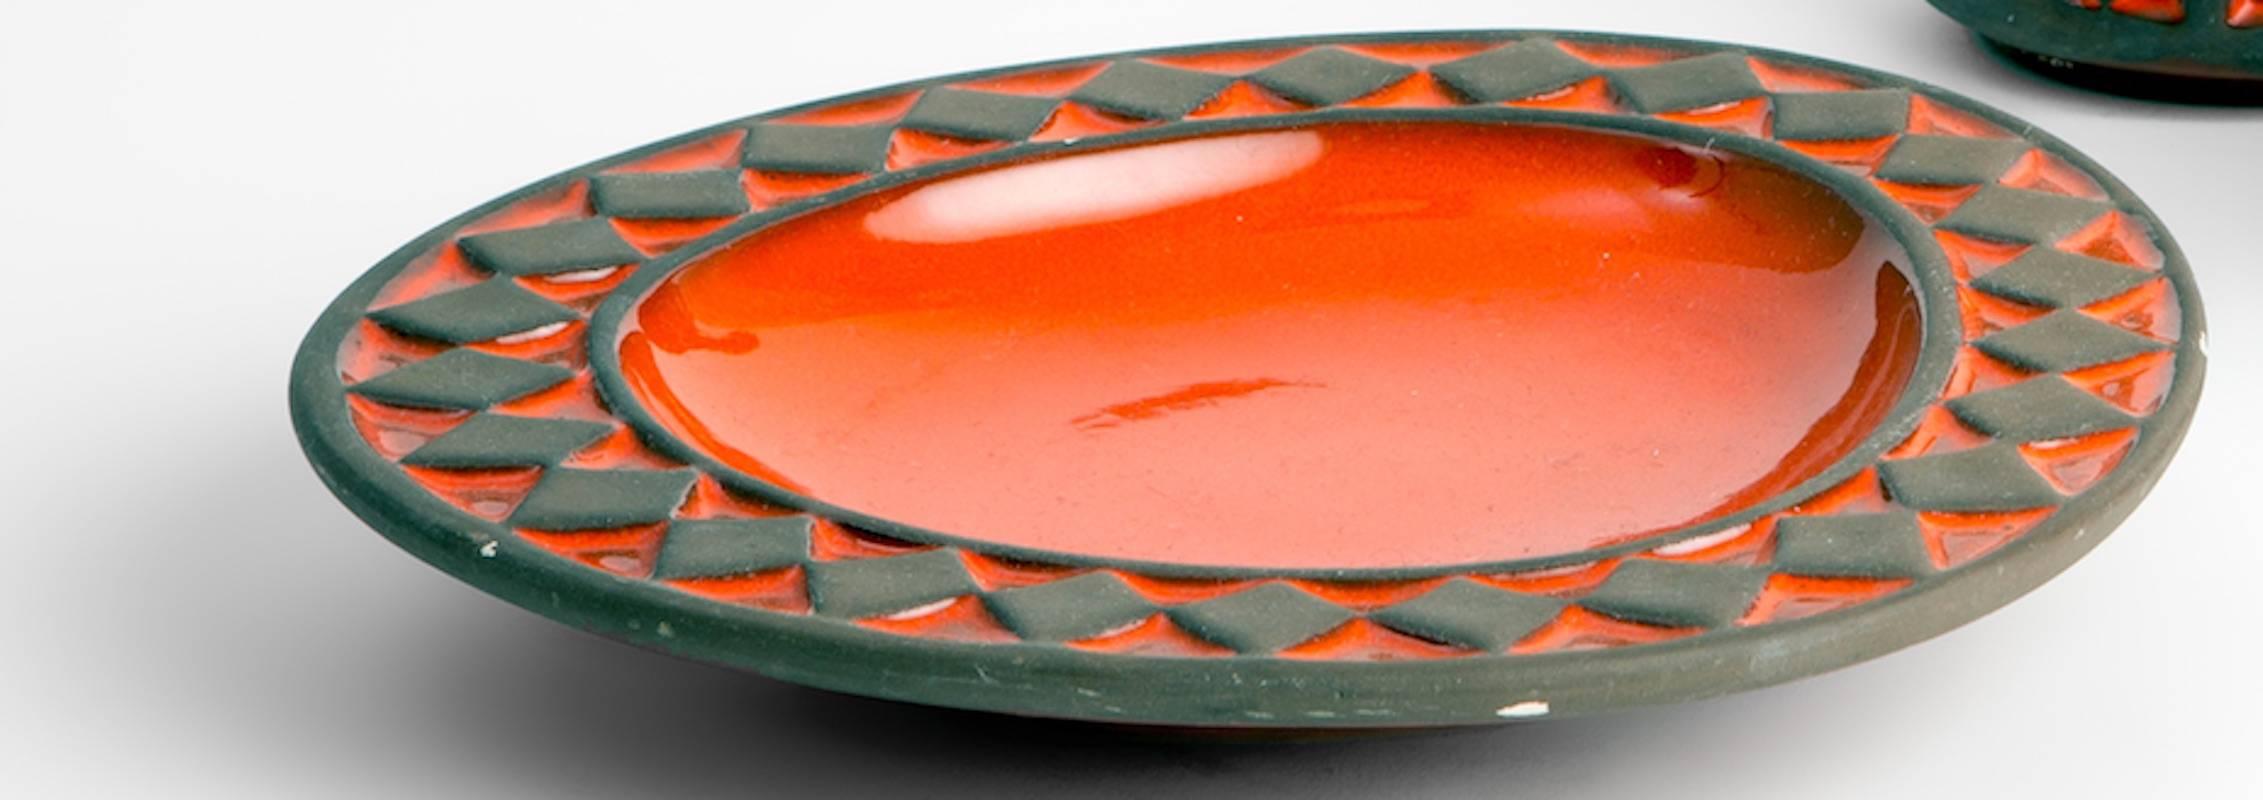 Set of three ceramics in a bright red/orange color with raised areas of un-glazed matte brown in bands/diamond pattern. With original sticker, 'Frank Keramik Denmark'

Measures: Plate: 8